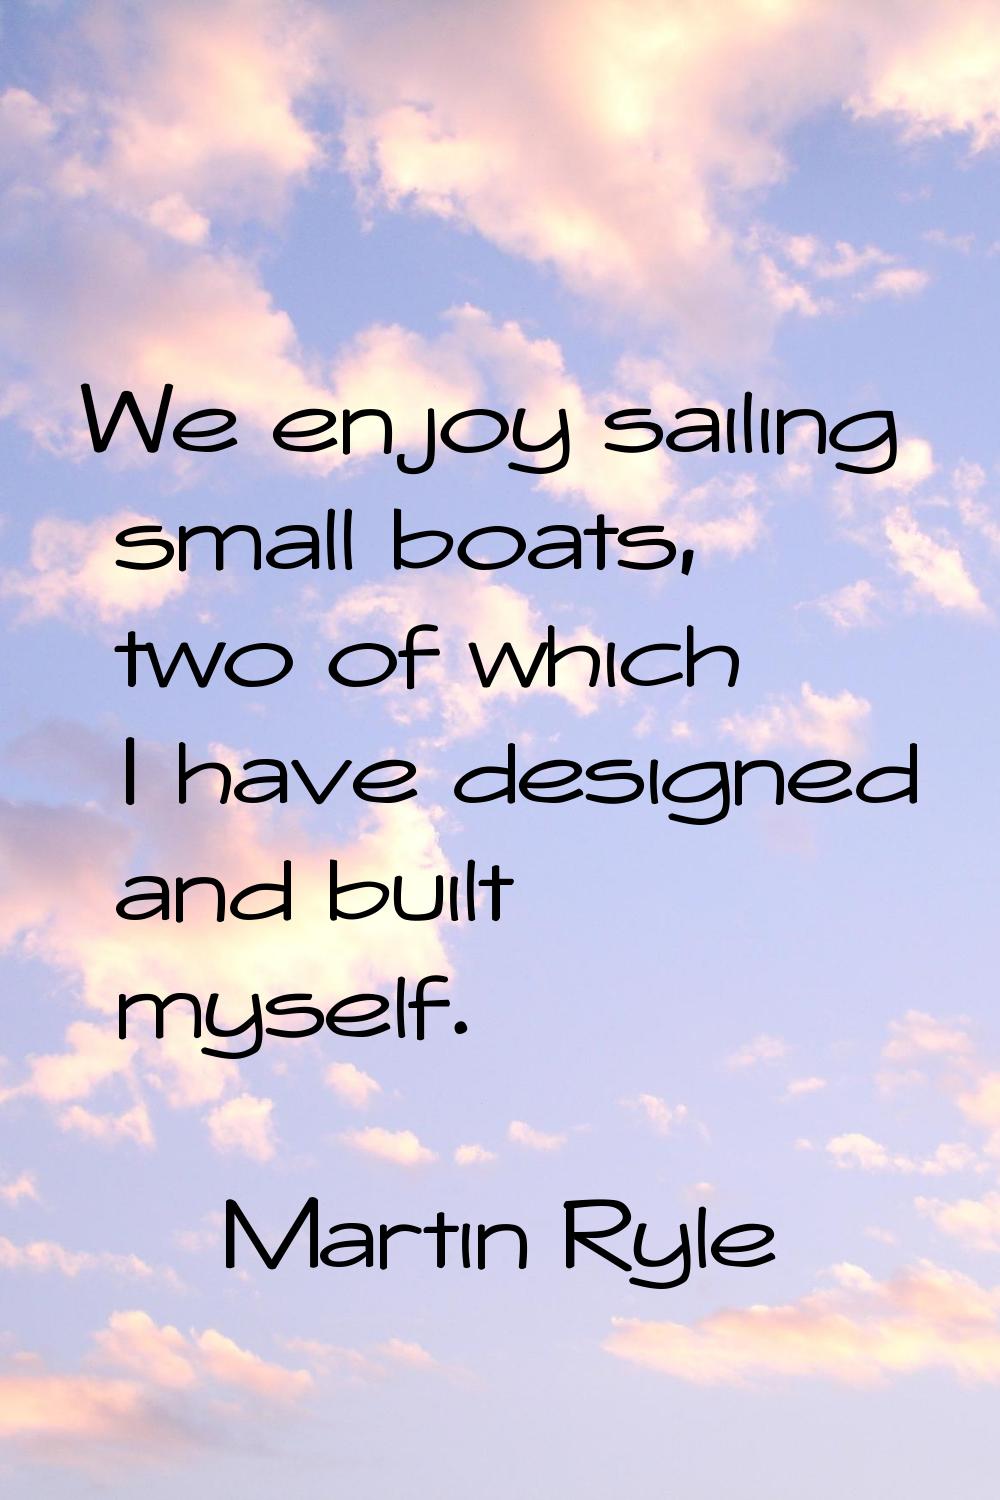 We enjoy sailing small boats, two of which I have designed and built myself.